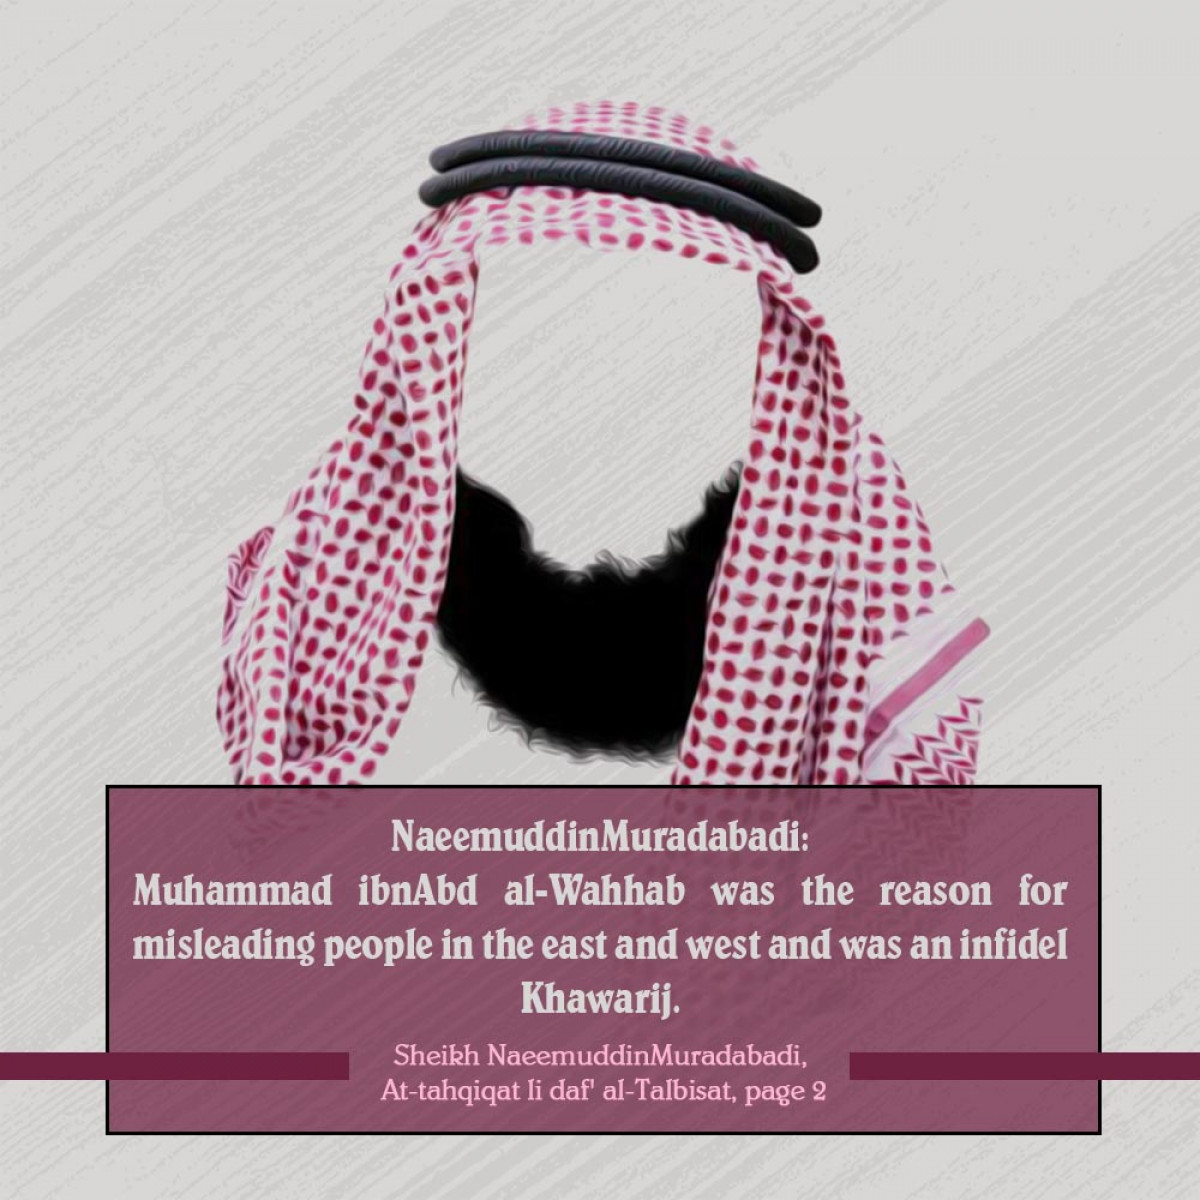 Muhammad ibnAbd al-Wahhab was the reason for misleading people in the east and west